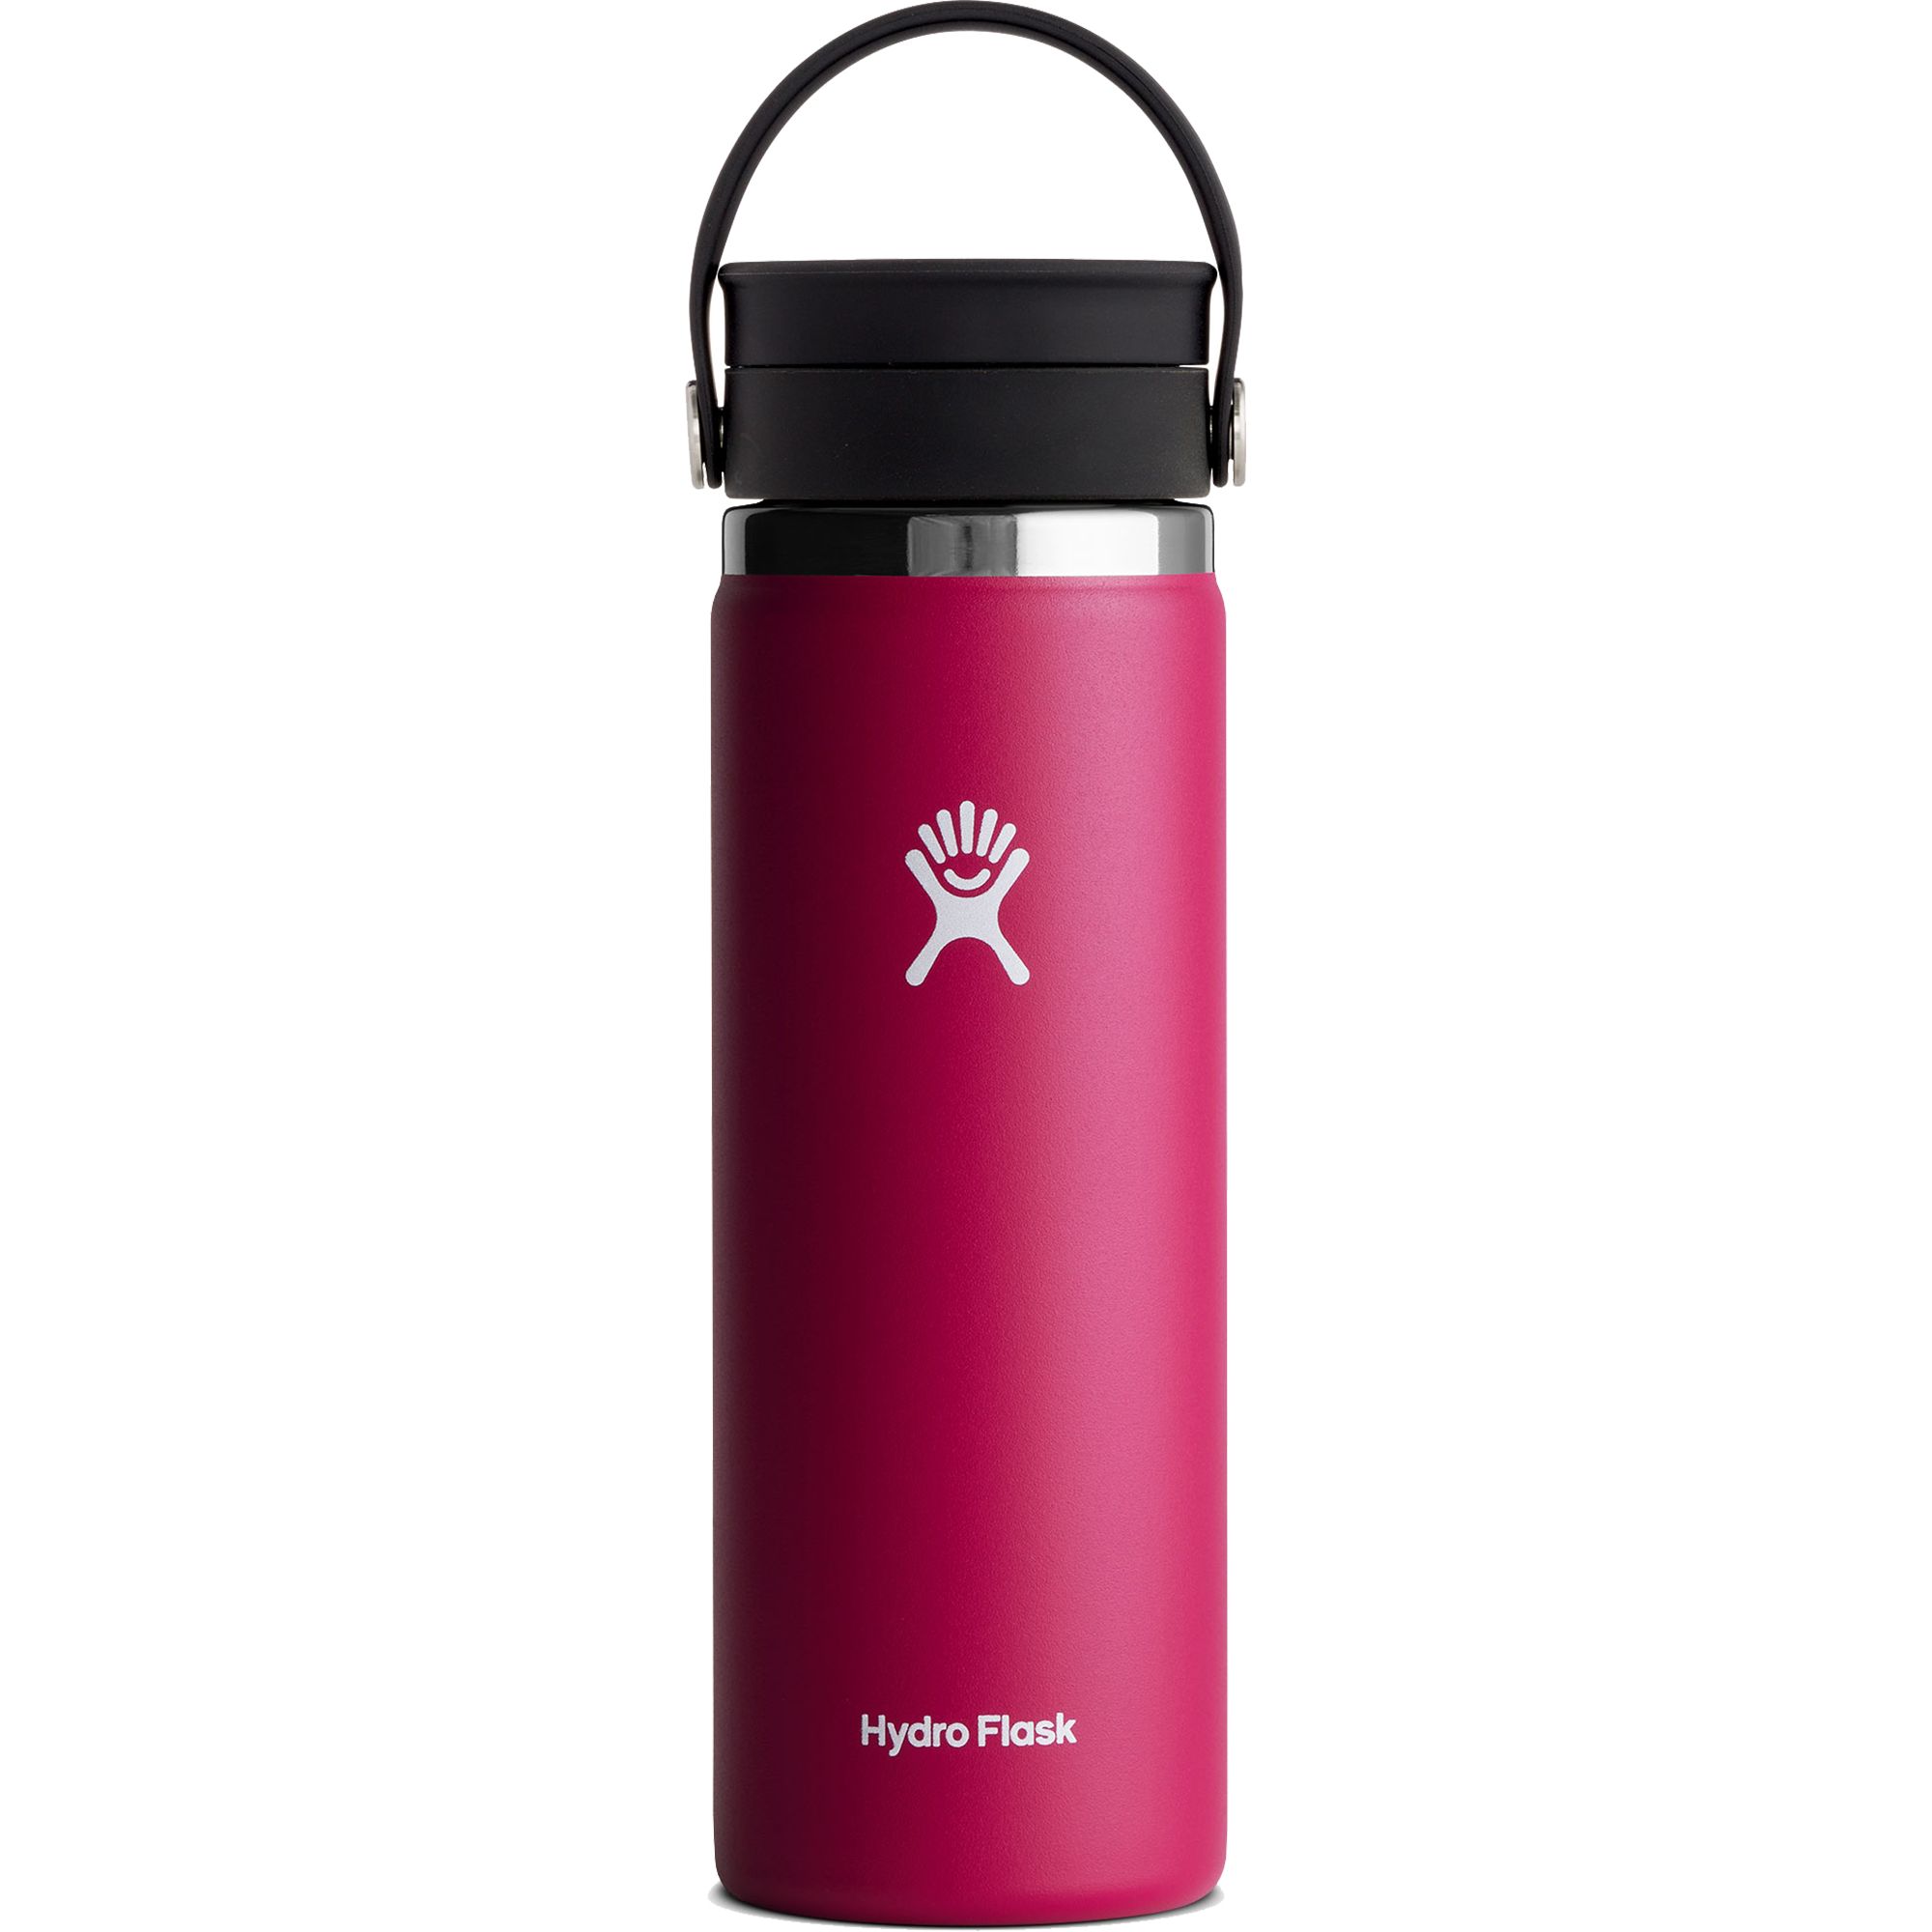 Hydro Flask: Extra 25% Off: 20-Oz Flex Sip Bottle (Snapper) $14.20, 24-Oz Coffee Mug (Snapper) $16.45 & More + Free Shipping on $49+ or Free Store Pickup at Dick's Sporting Goods